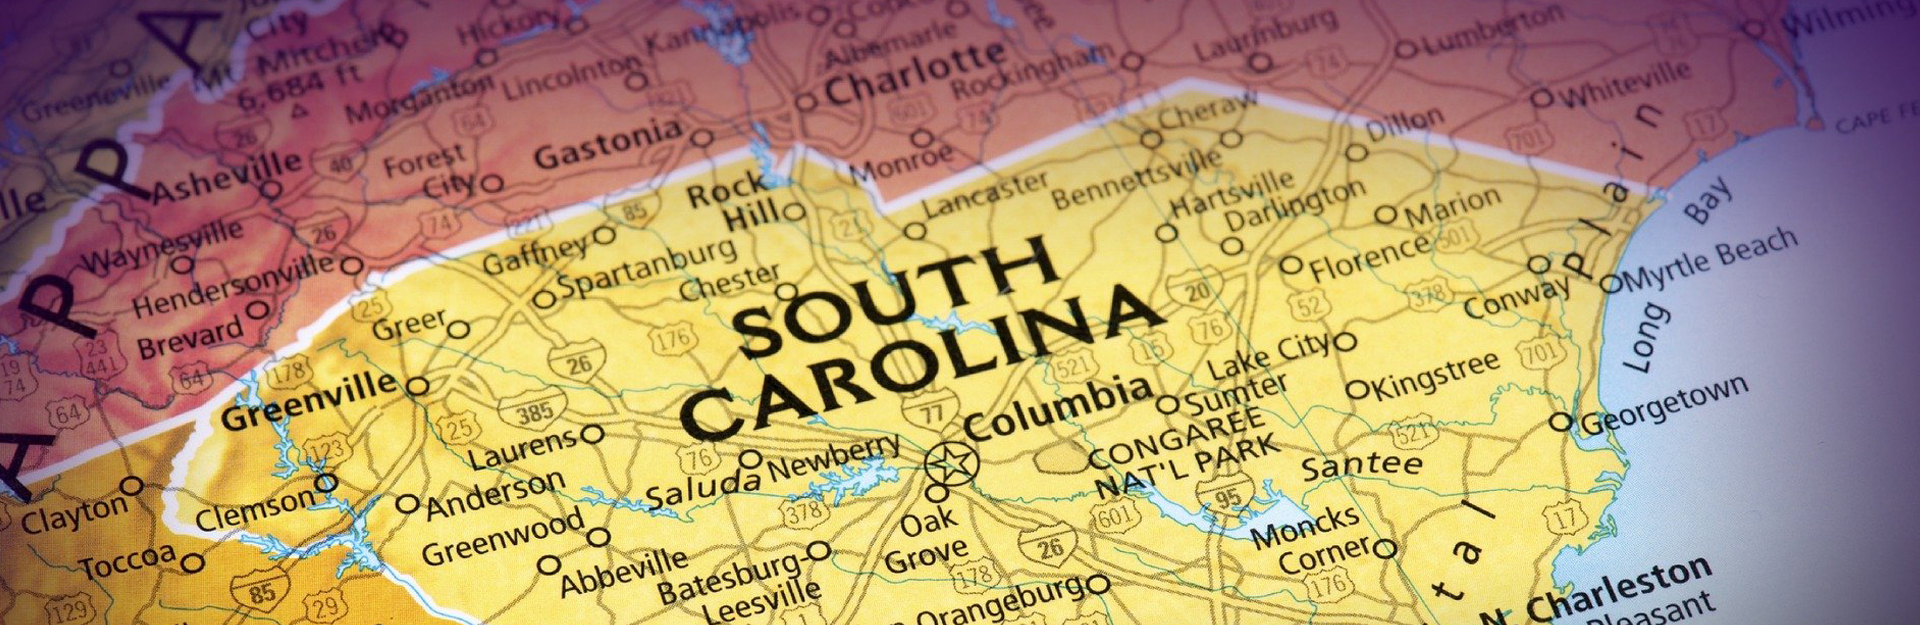 colorful map of south Carolina identifying roads and towns